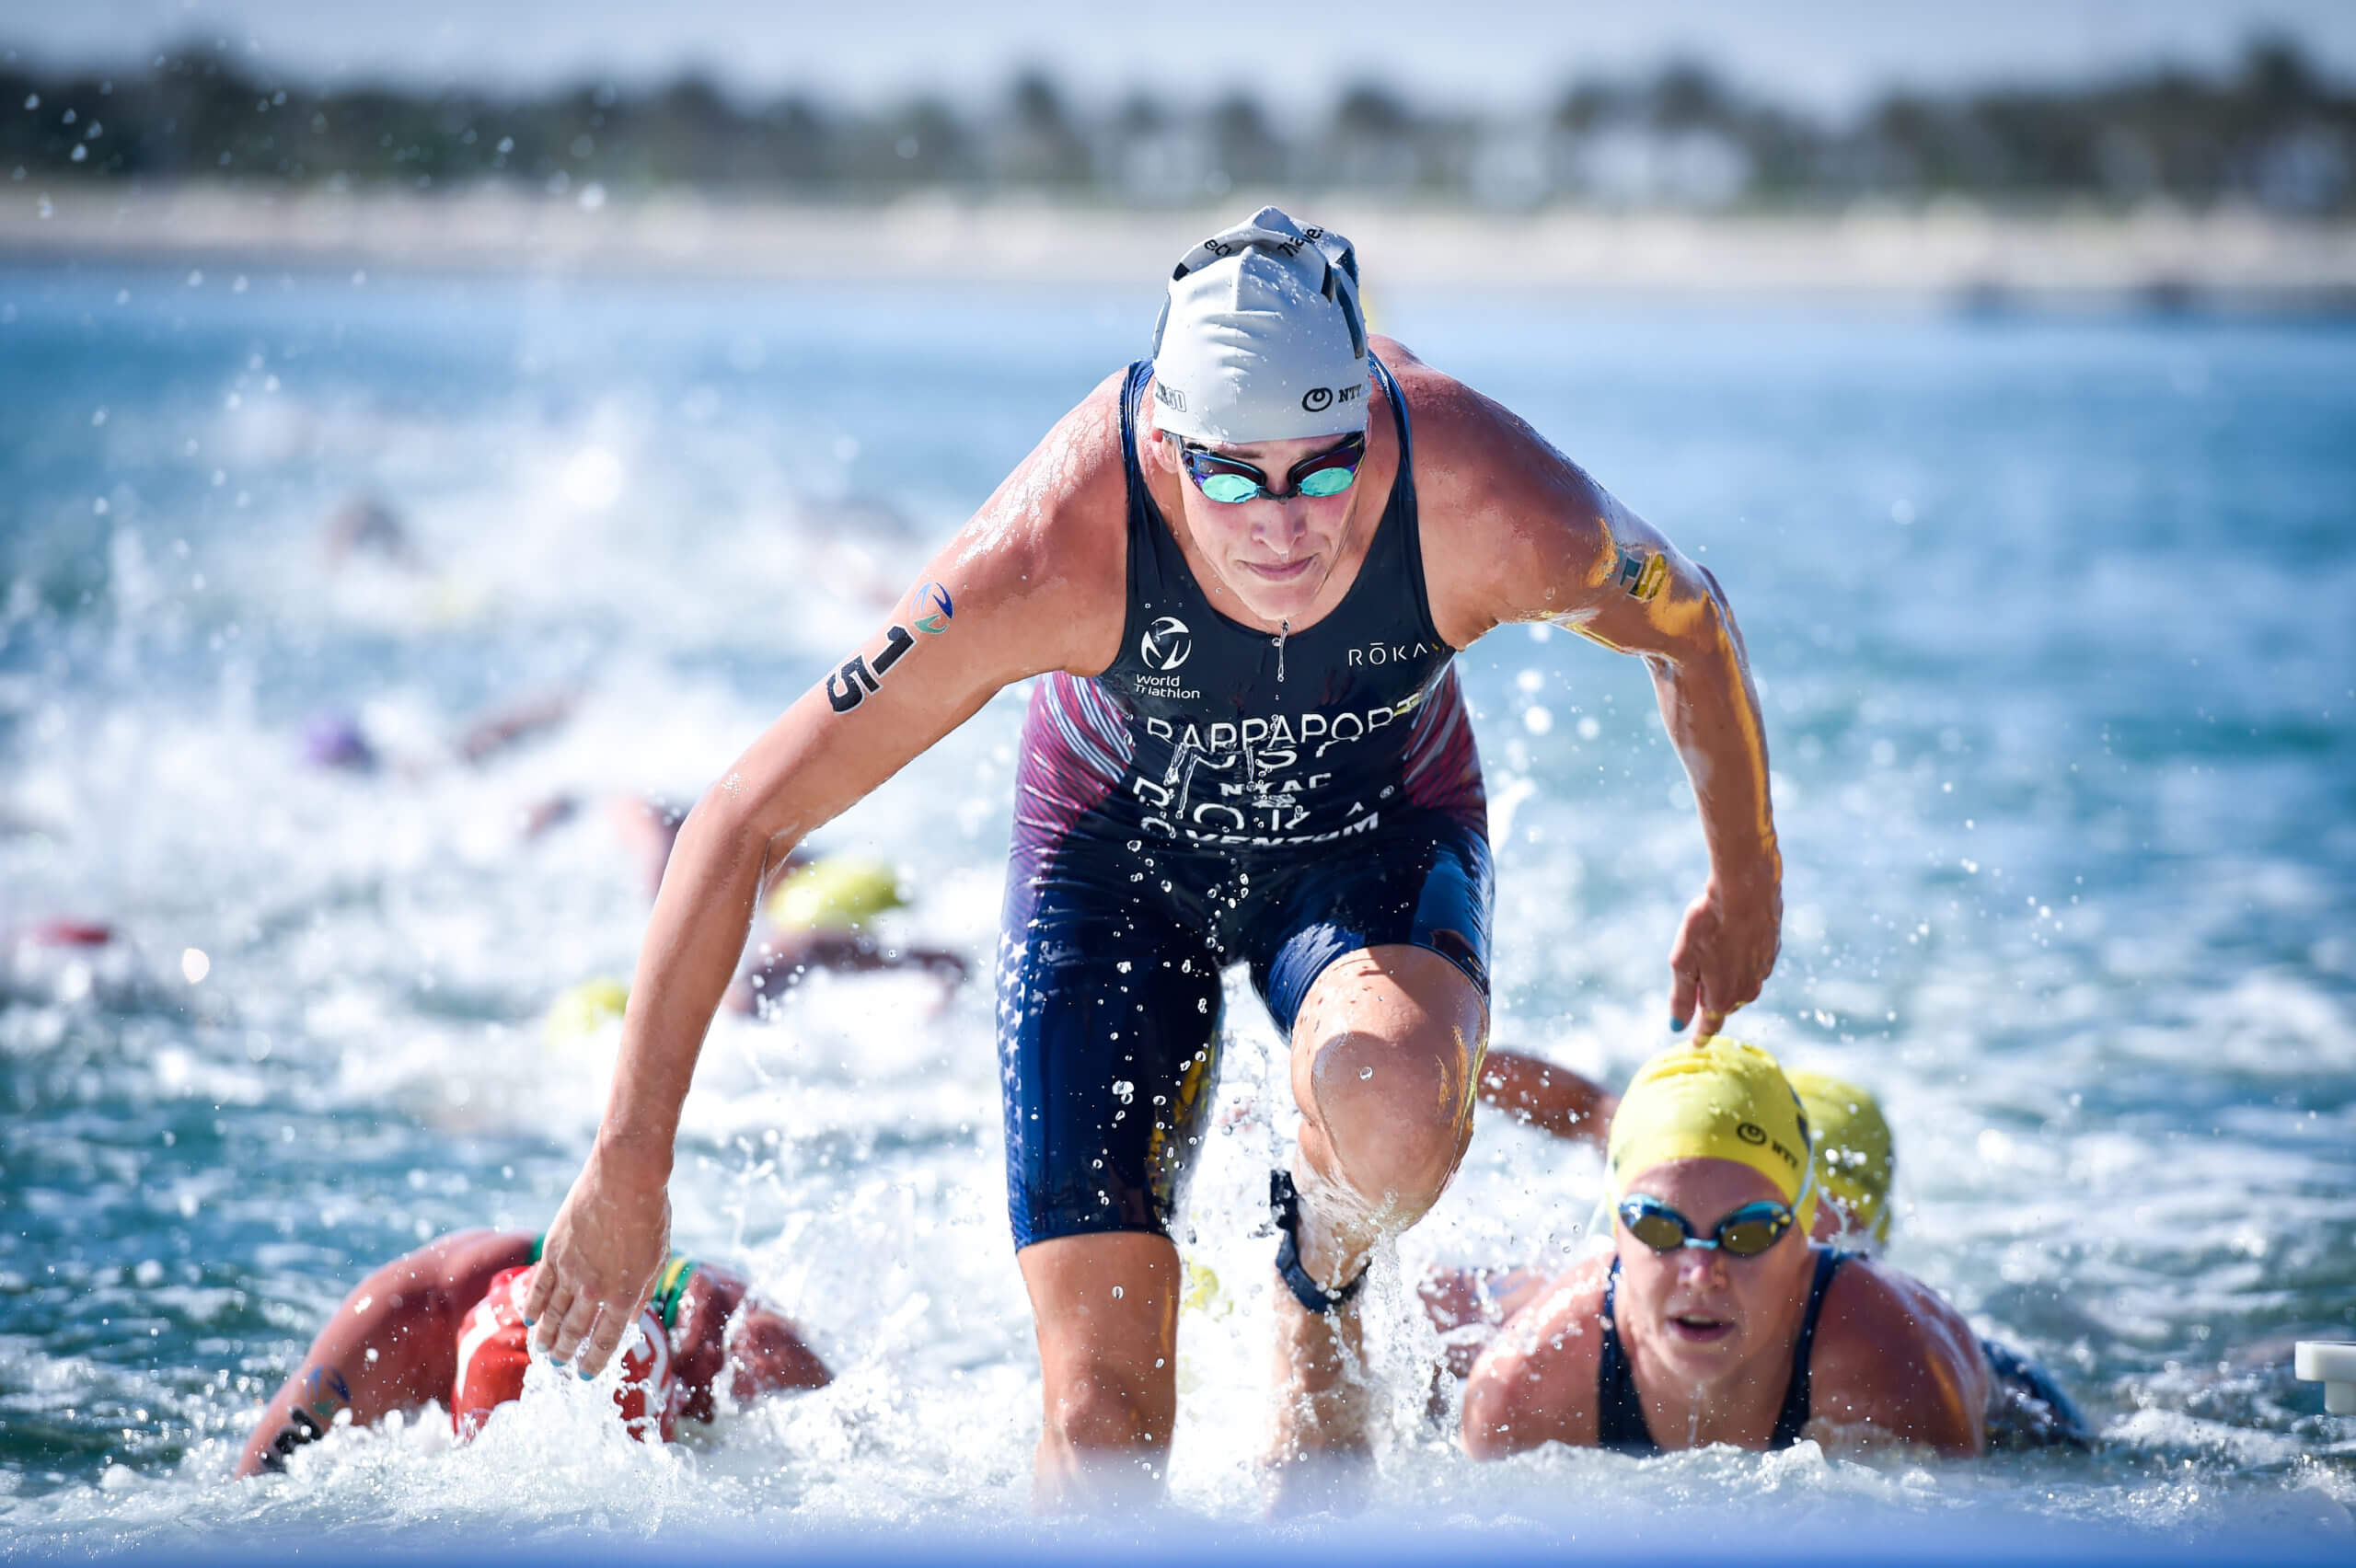 native Encommium lawaai Summer Rappaport Journey from College Swimming to Olympic Triathlon